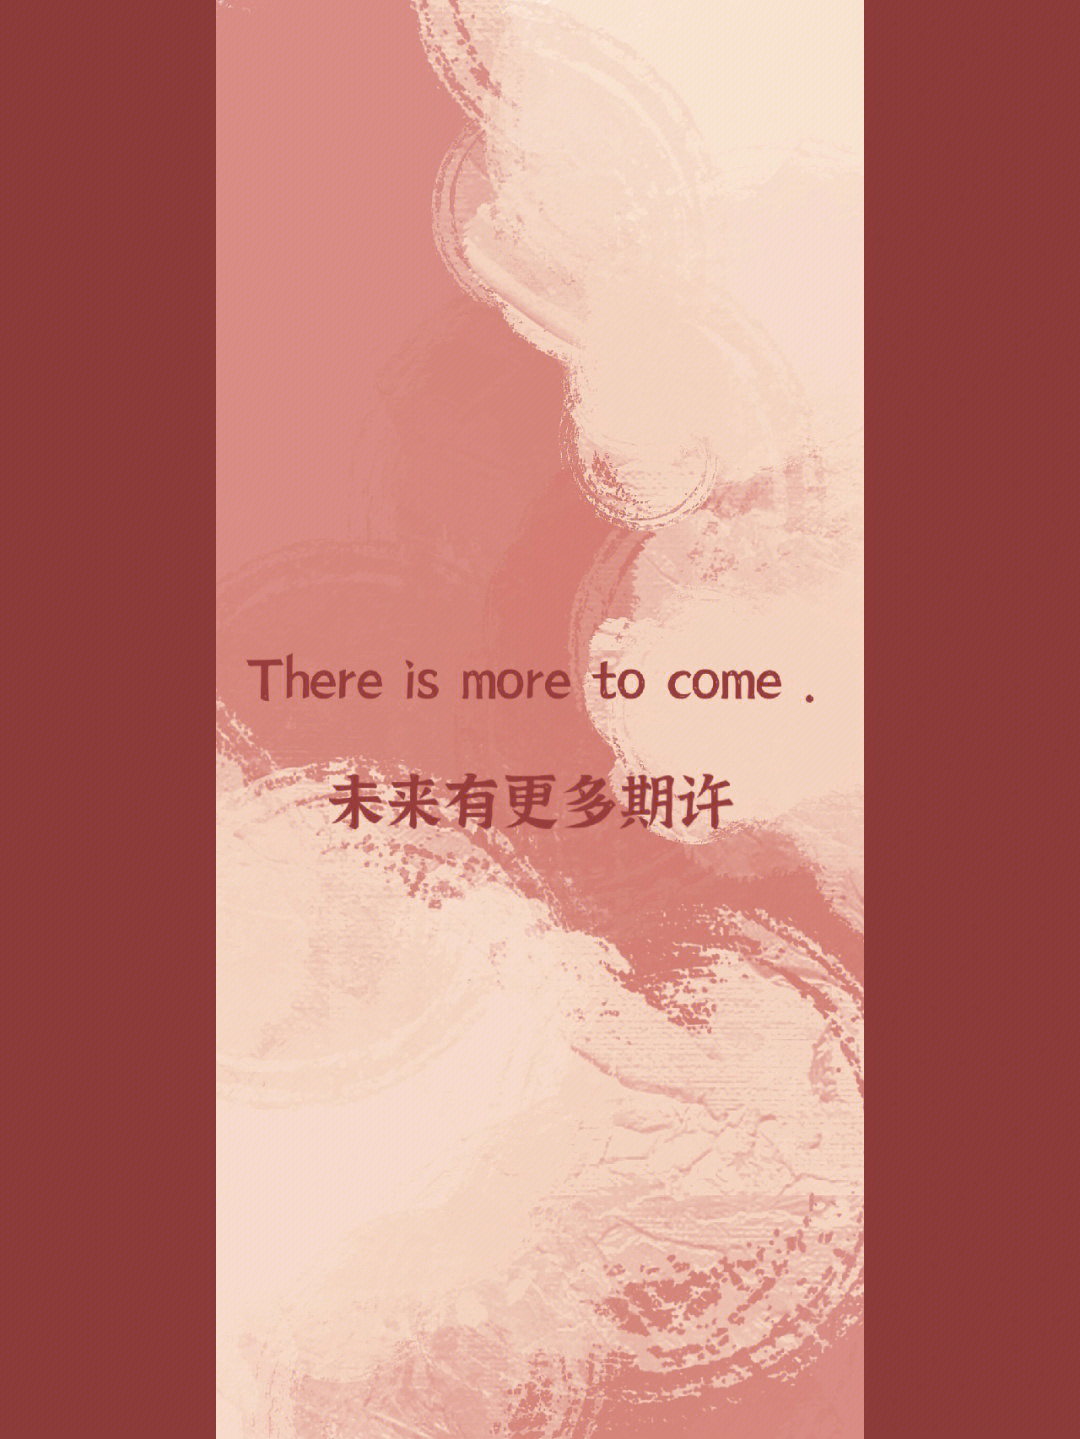 there is more to come图片